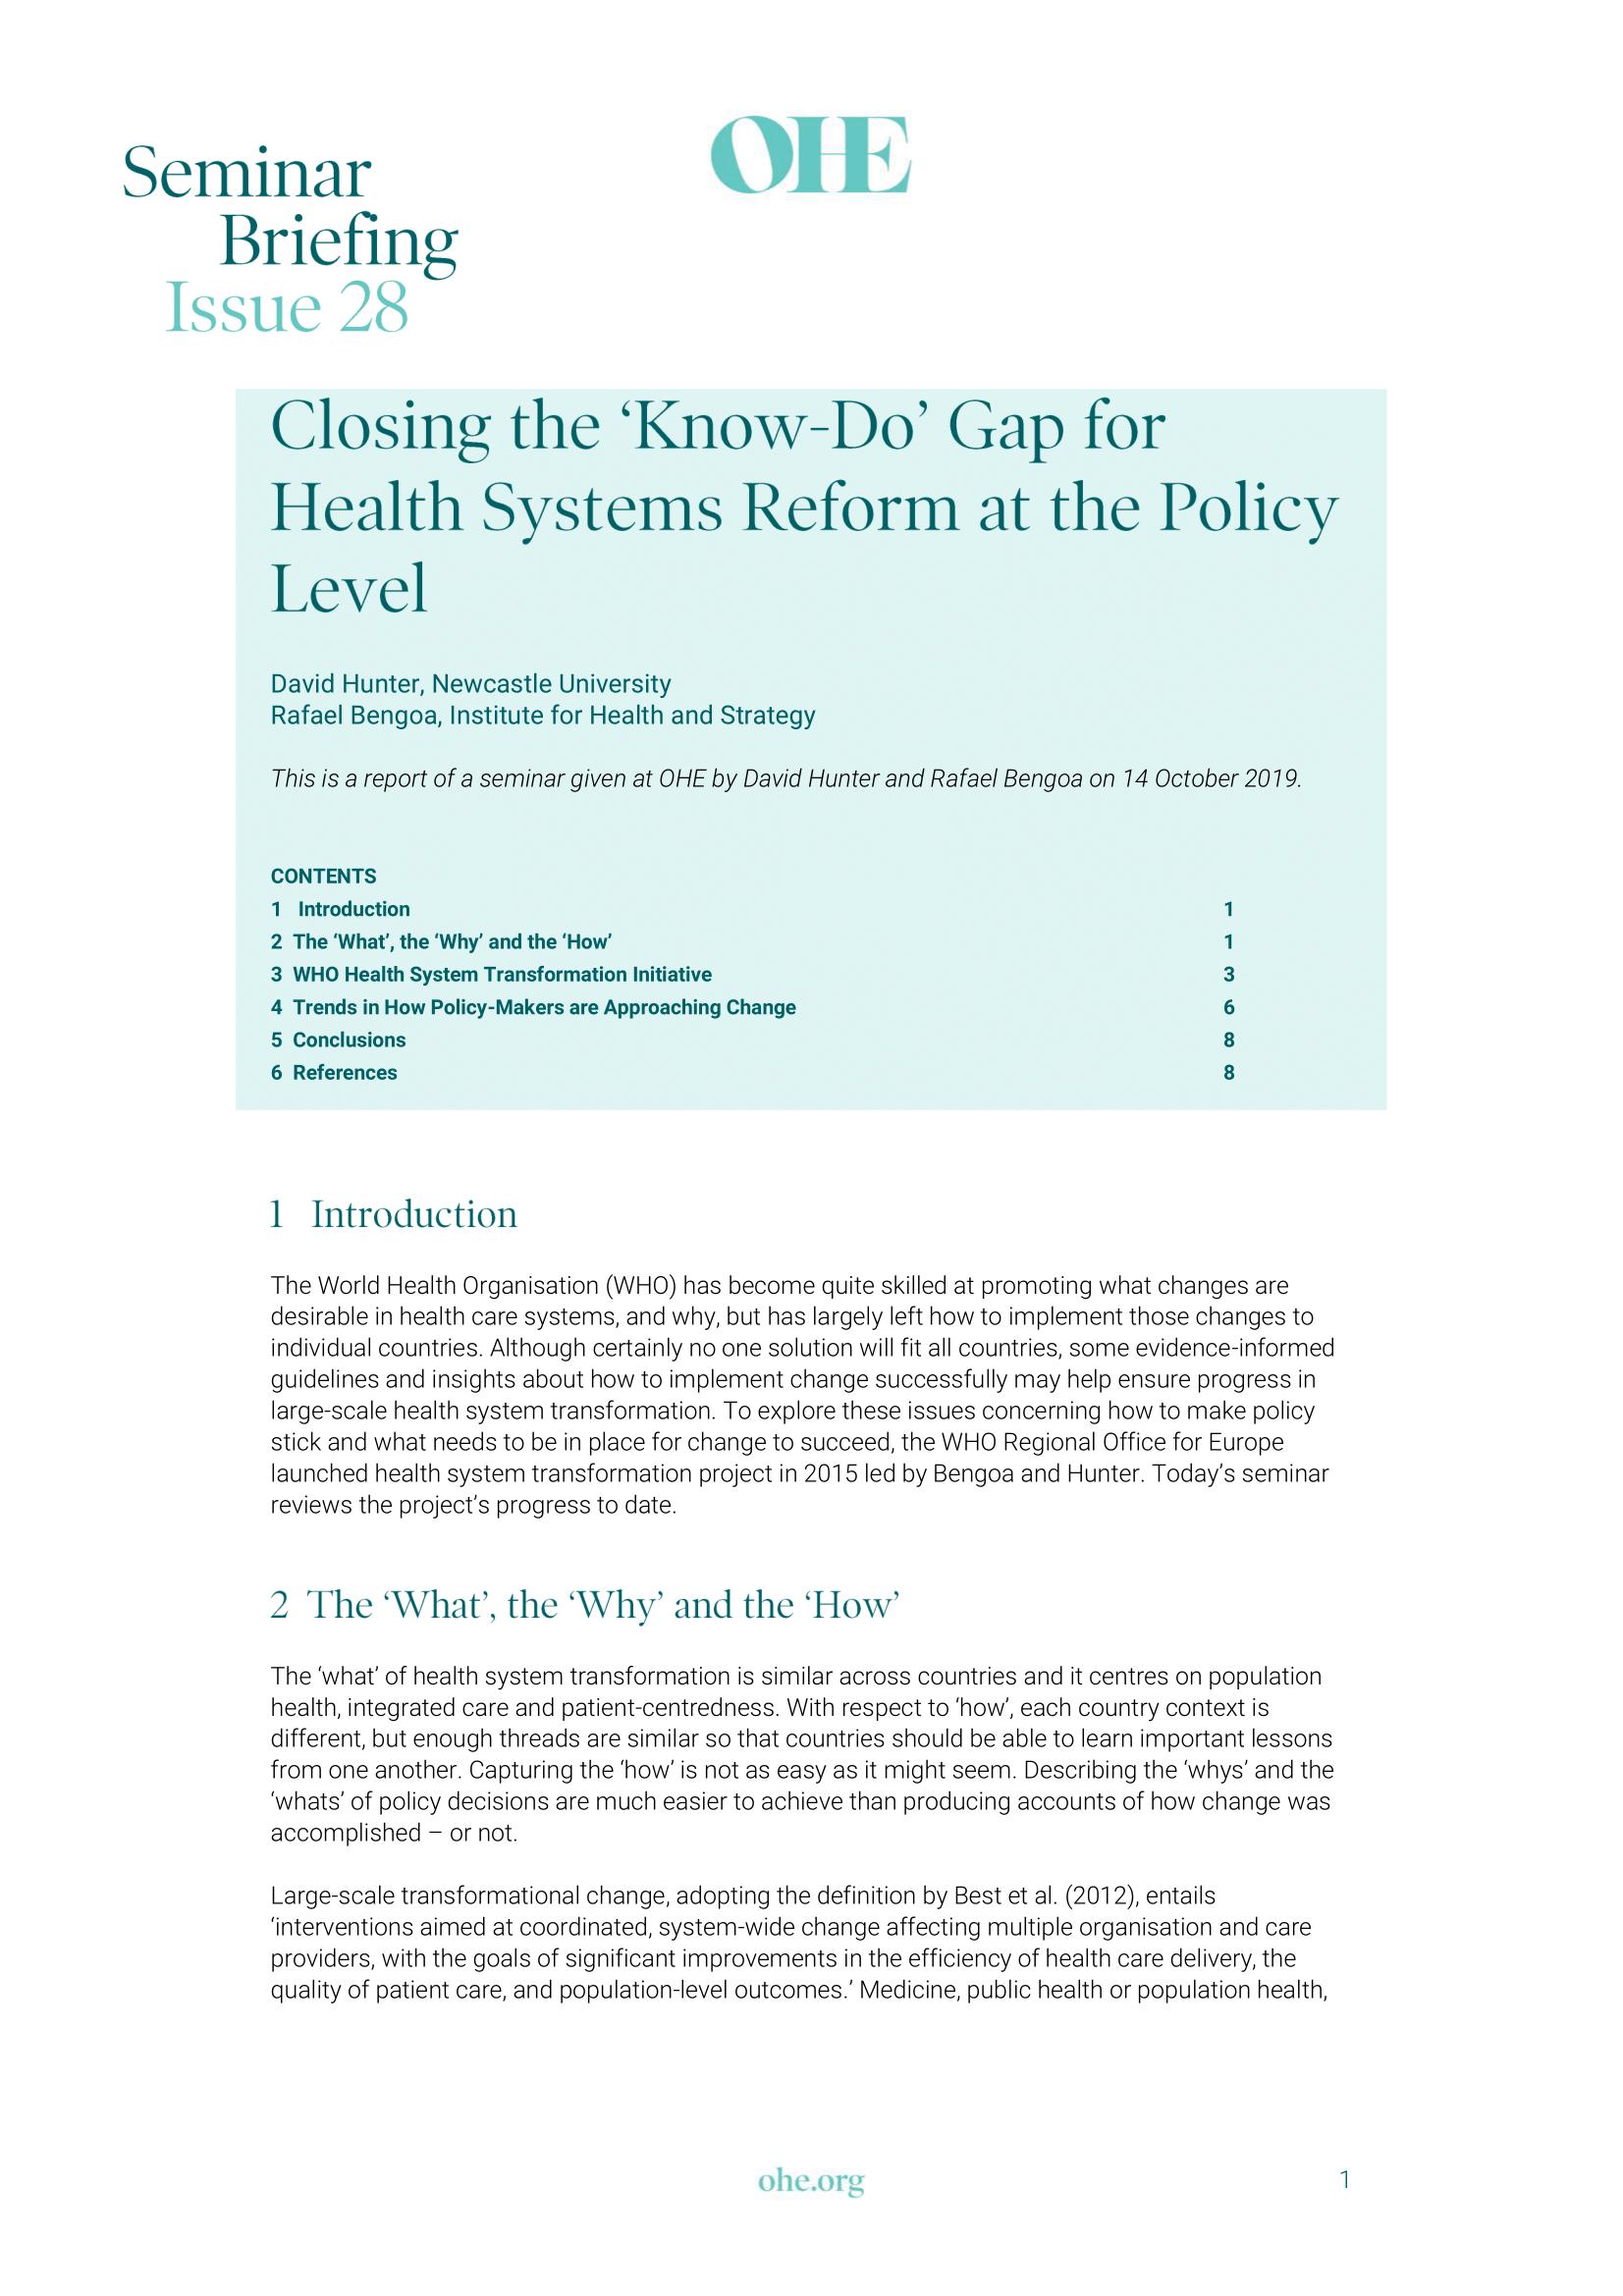 Closing the ‘Know-Do’ Gap for Health Systems Reform at the Policy Level